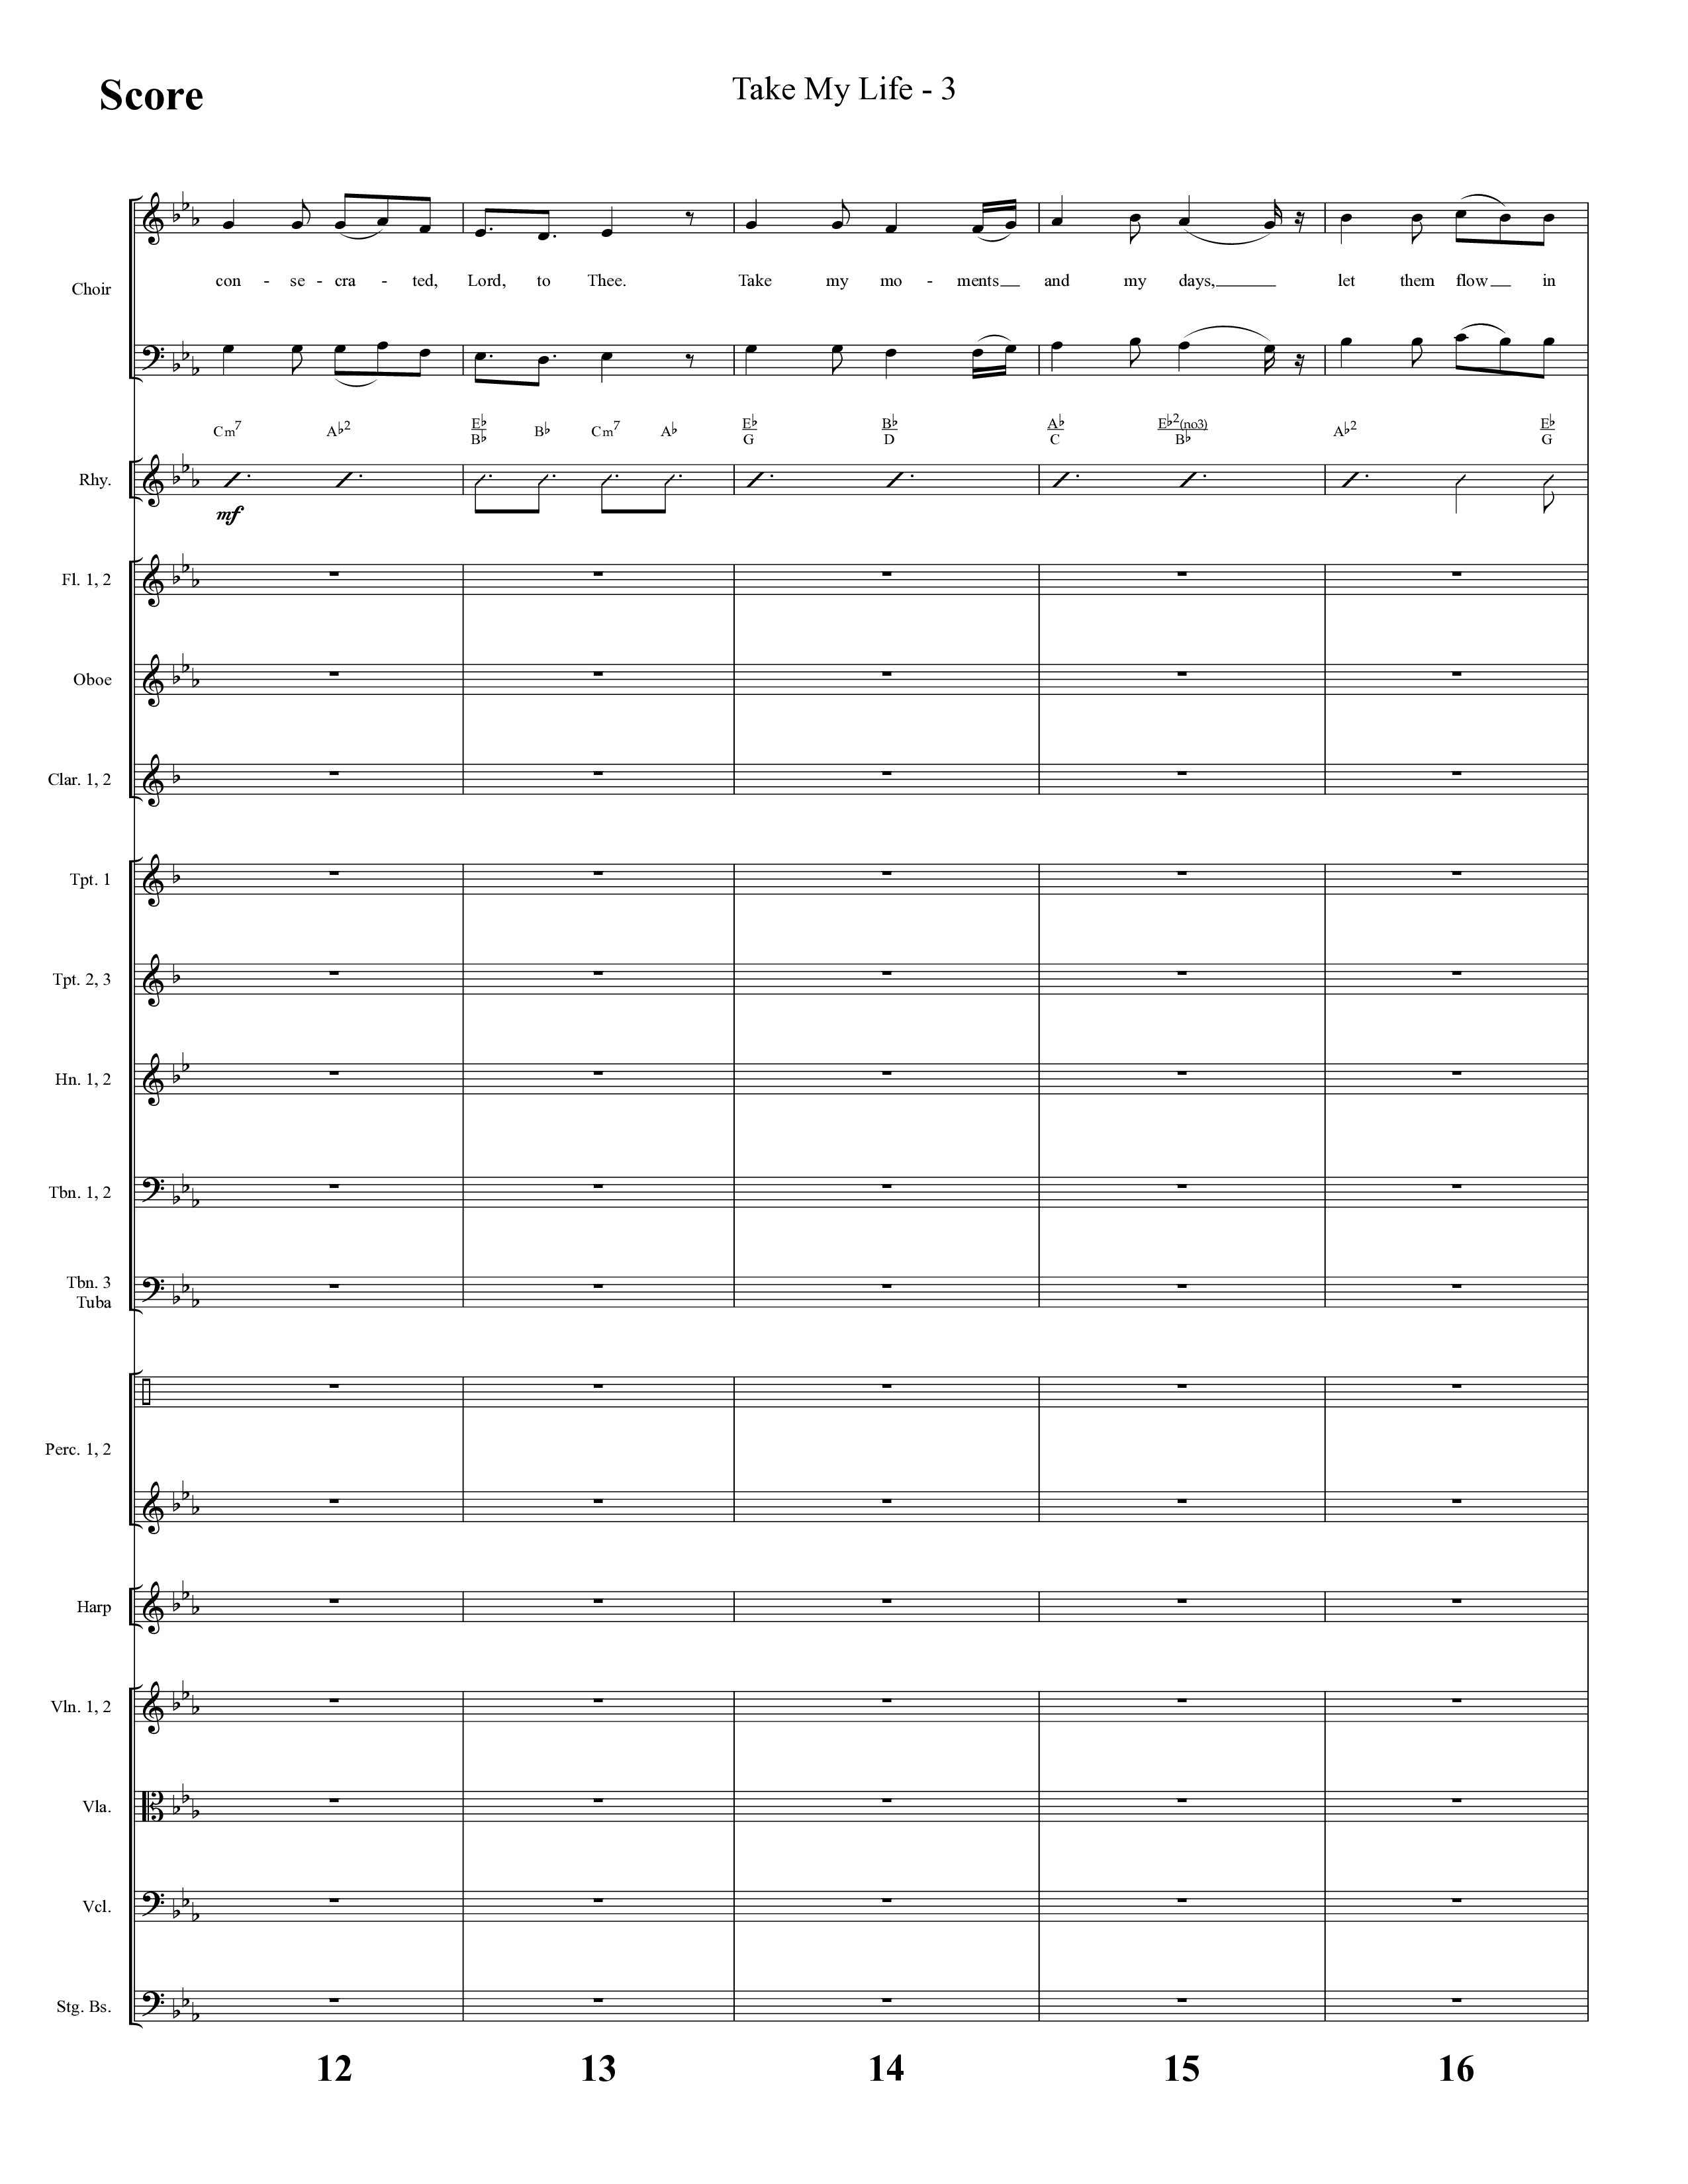 Take My Life (with Take My Life And Let It Be, Take My Life) (Choral Anthem SATB) Conductor's Score (Lifeway Choral / Arr. Cliff Duren)